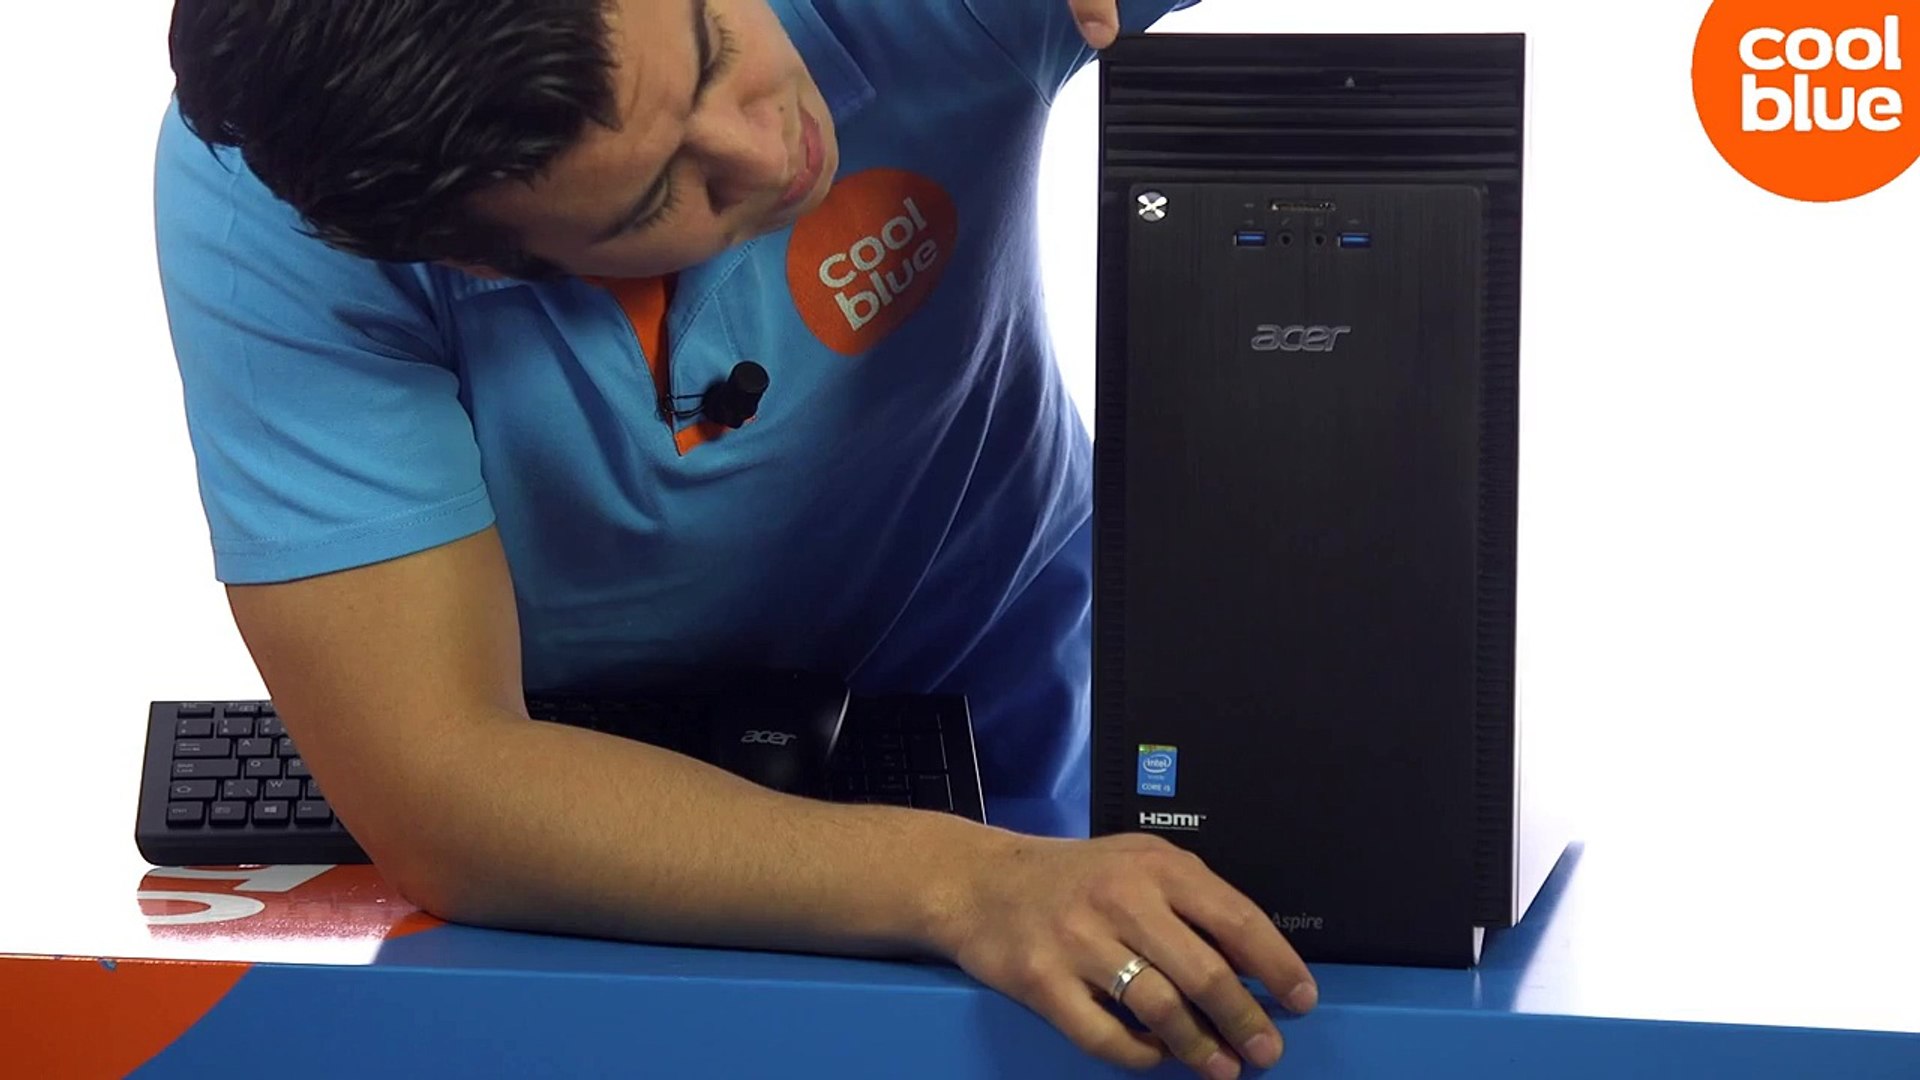 Acer Aspire TC-710 I5810 Desktop Productvideo - video Dailymotion